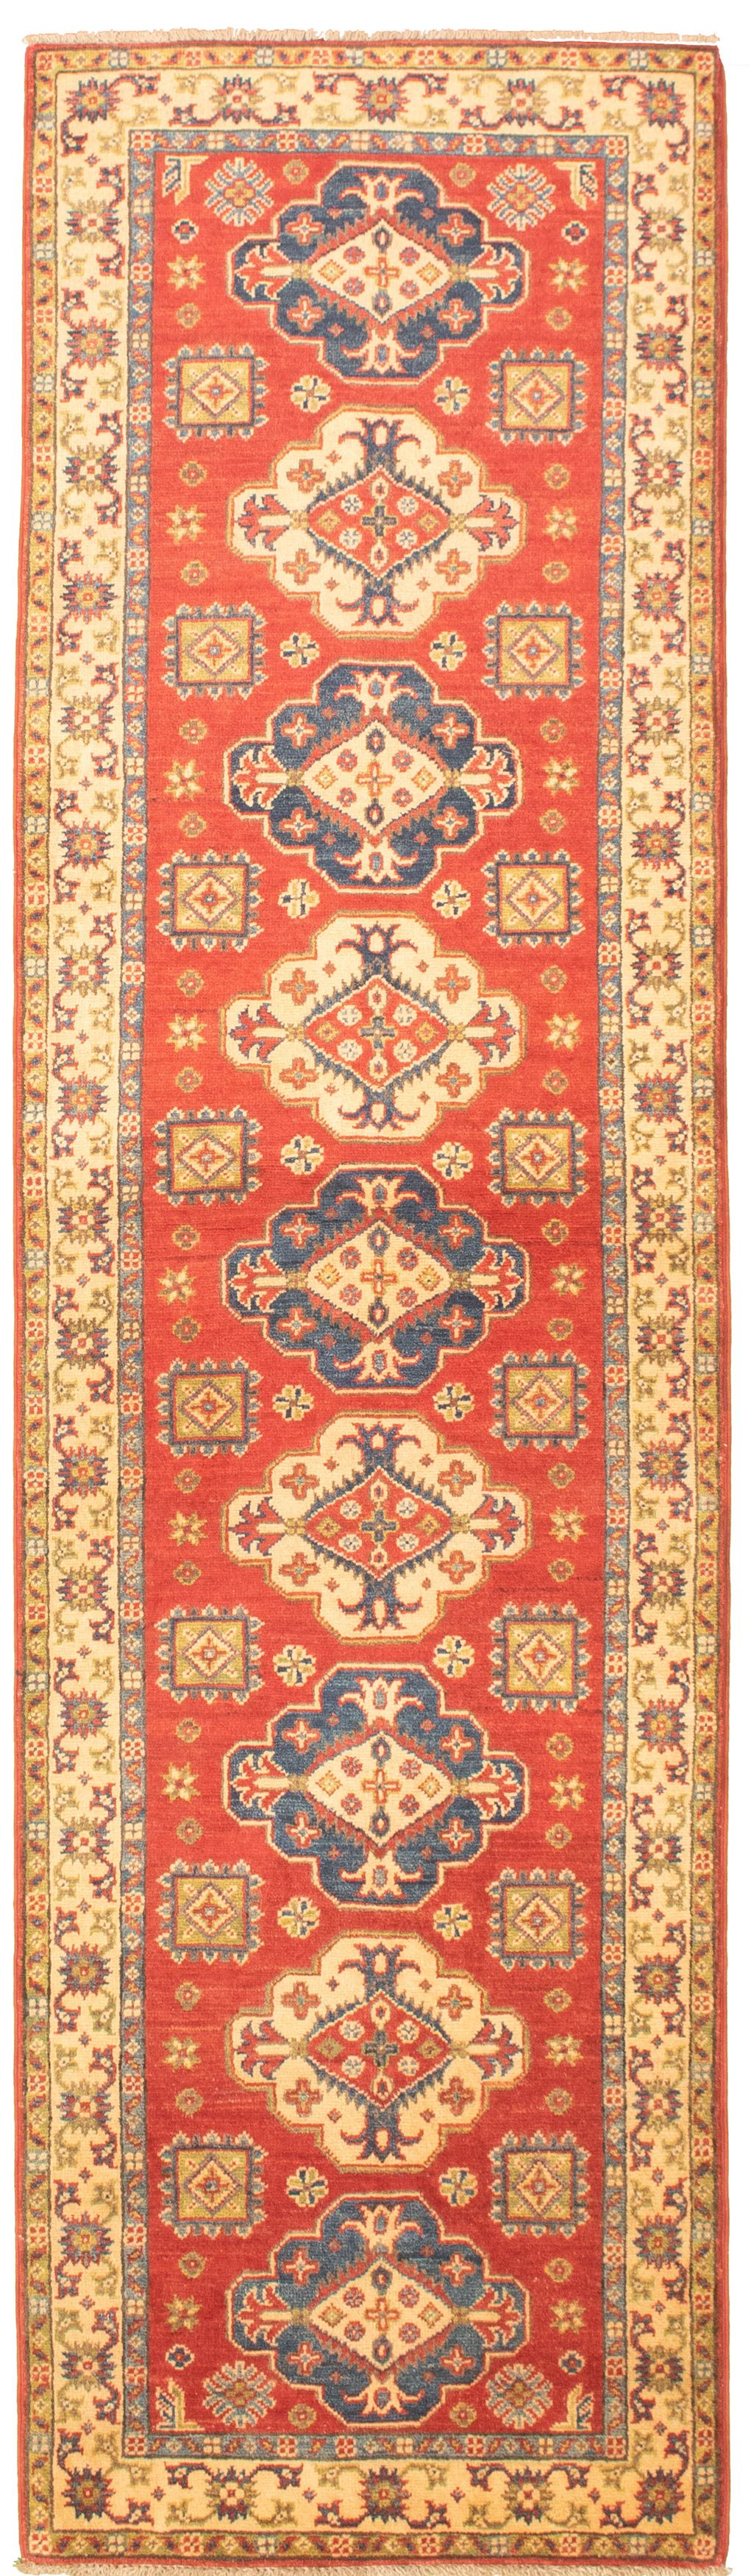 Hand-knotted Finest Gazni Red Wool Rug 2'7" x 10'0"  Size: 2'7" x 10'0"  